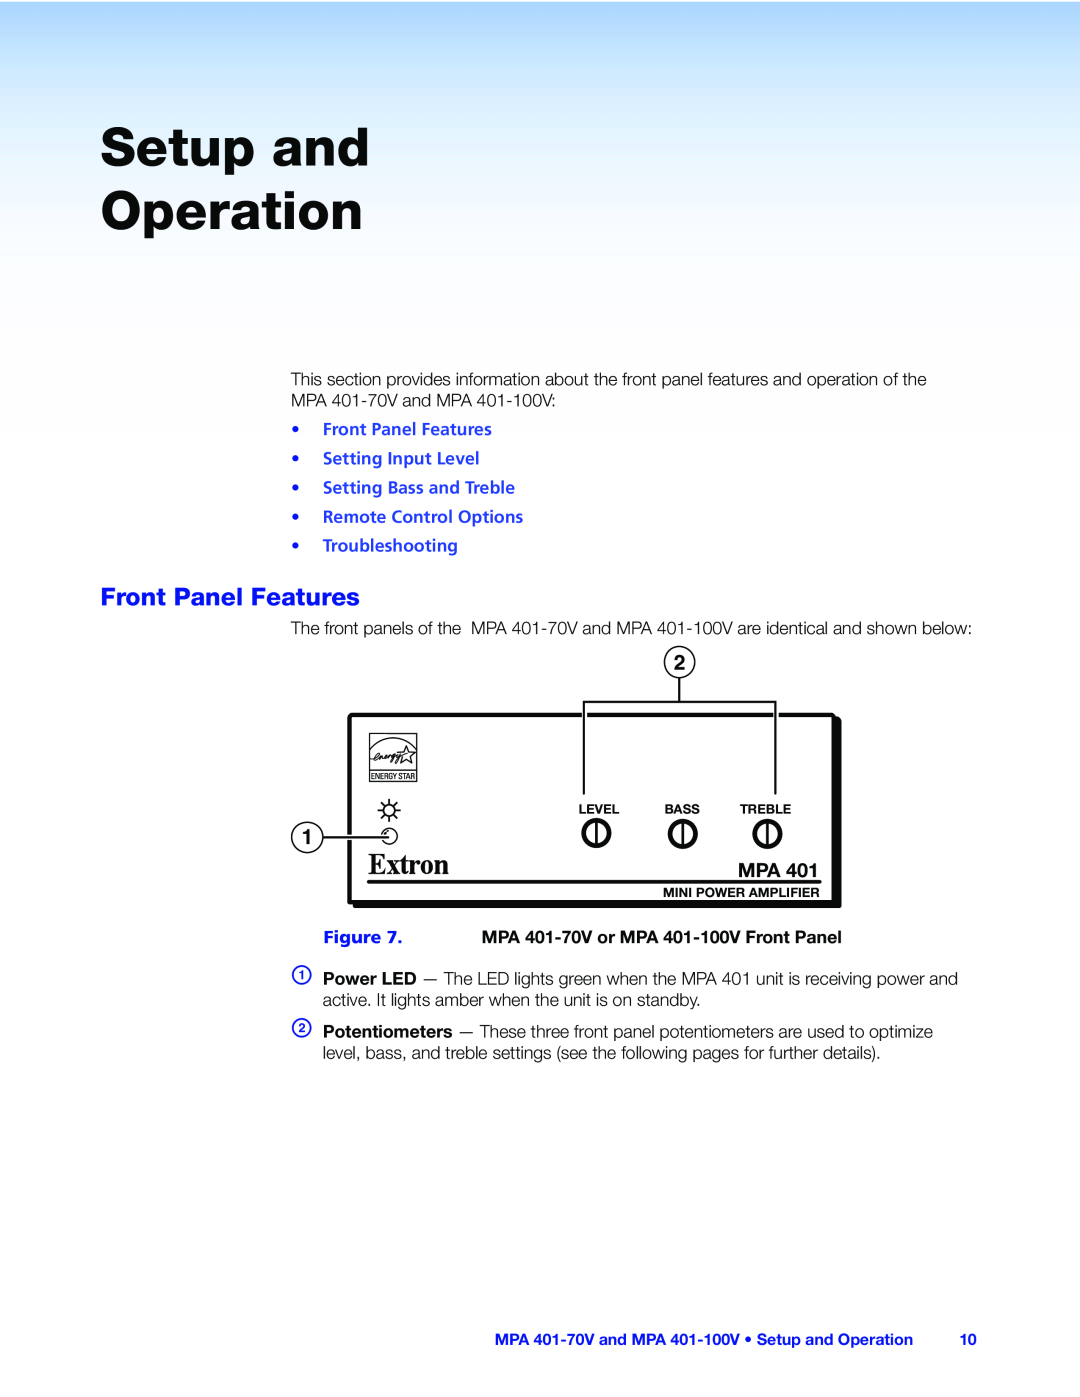 Extron electronic MPA 401 manual Setup and Operation, Front Panel Features Setting Input Level, Troubleshooting 